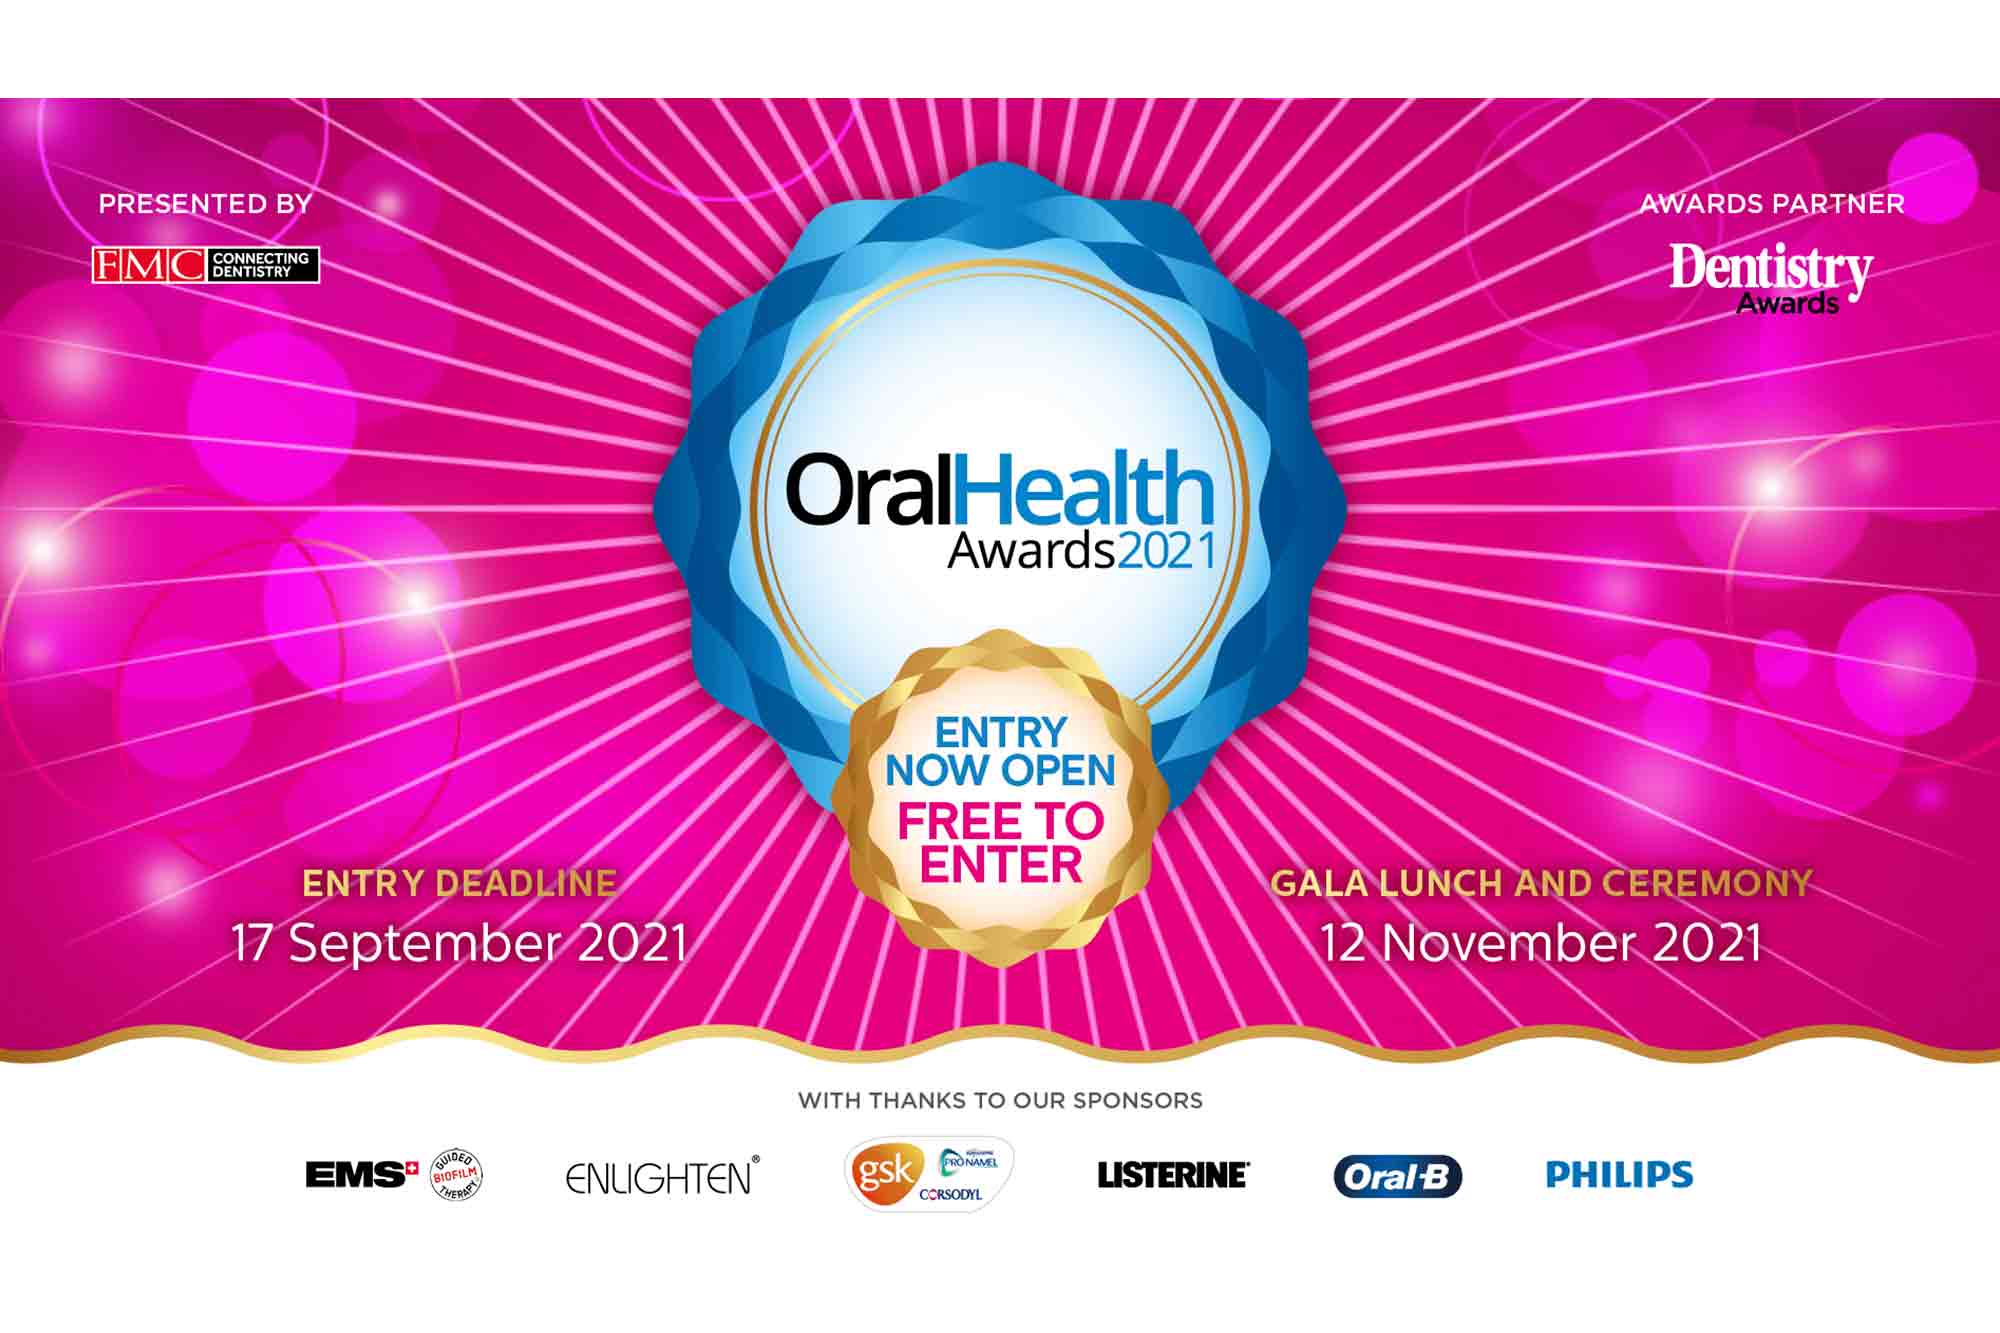 Who's ready for hugs at the Oral Health Awards?